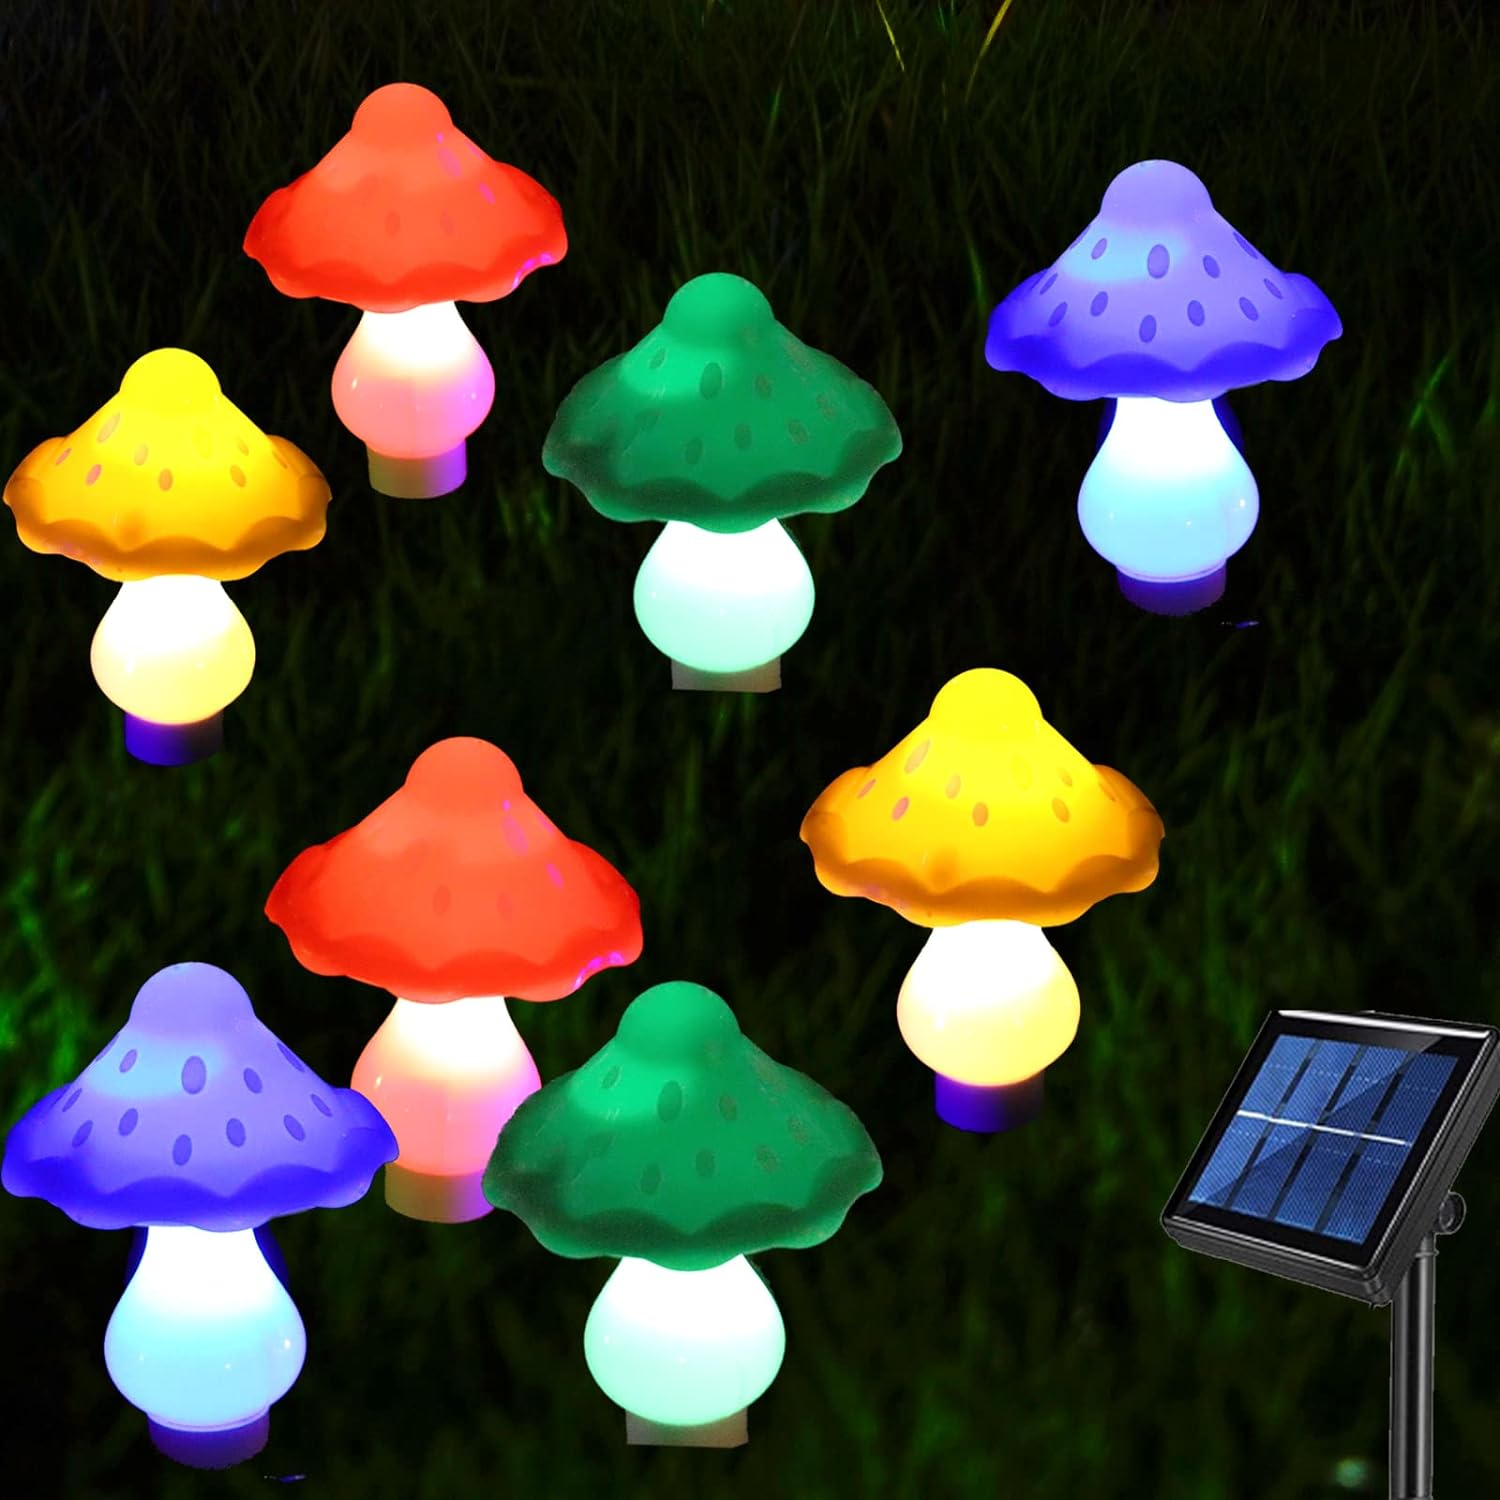 These little mushroom lights are so adorable and the solar power keeps them lit all night long. They actually throw out quite a bit of light to be so small. These lights would look adorable in a little fairy garden which I may make next spring!